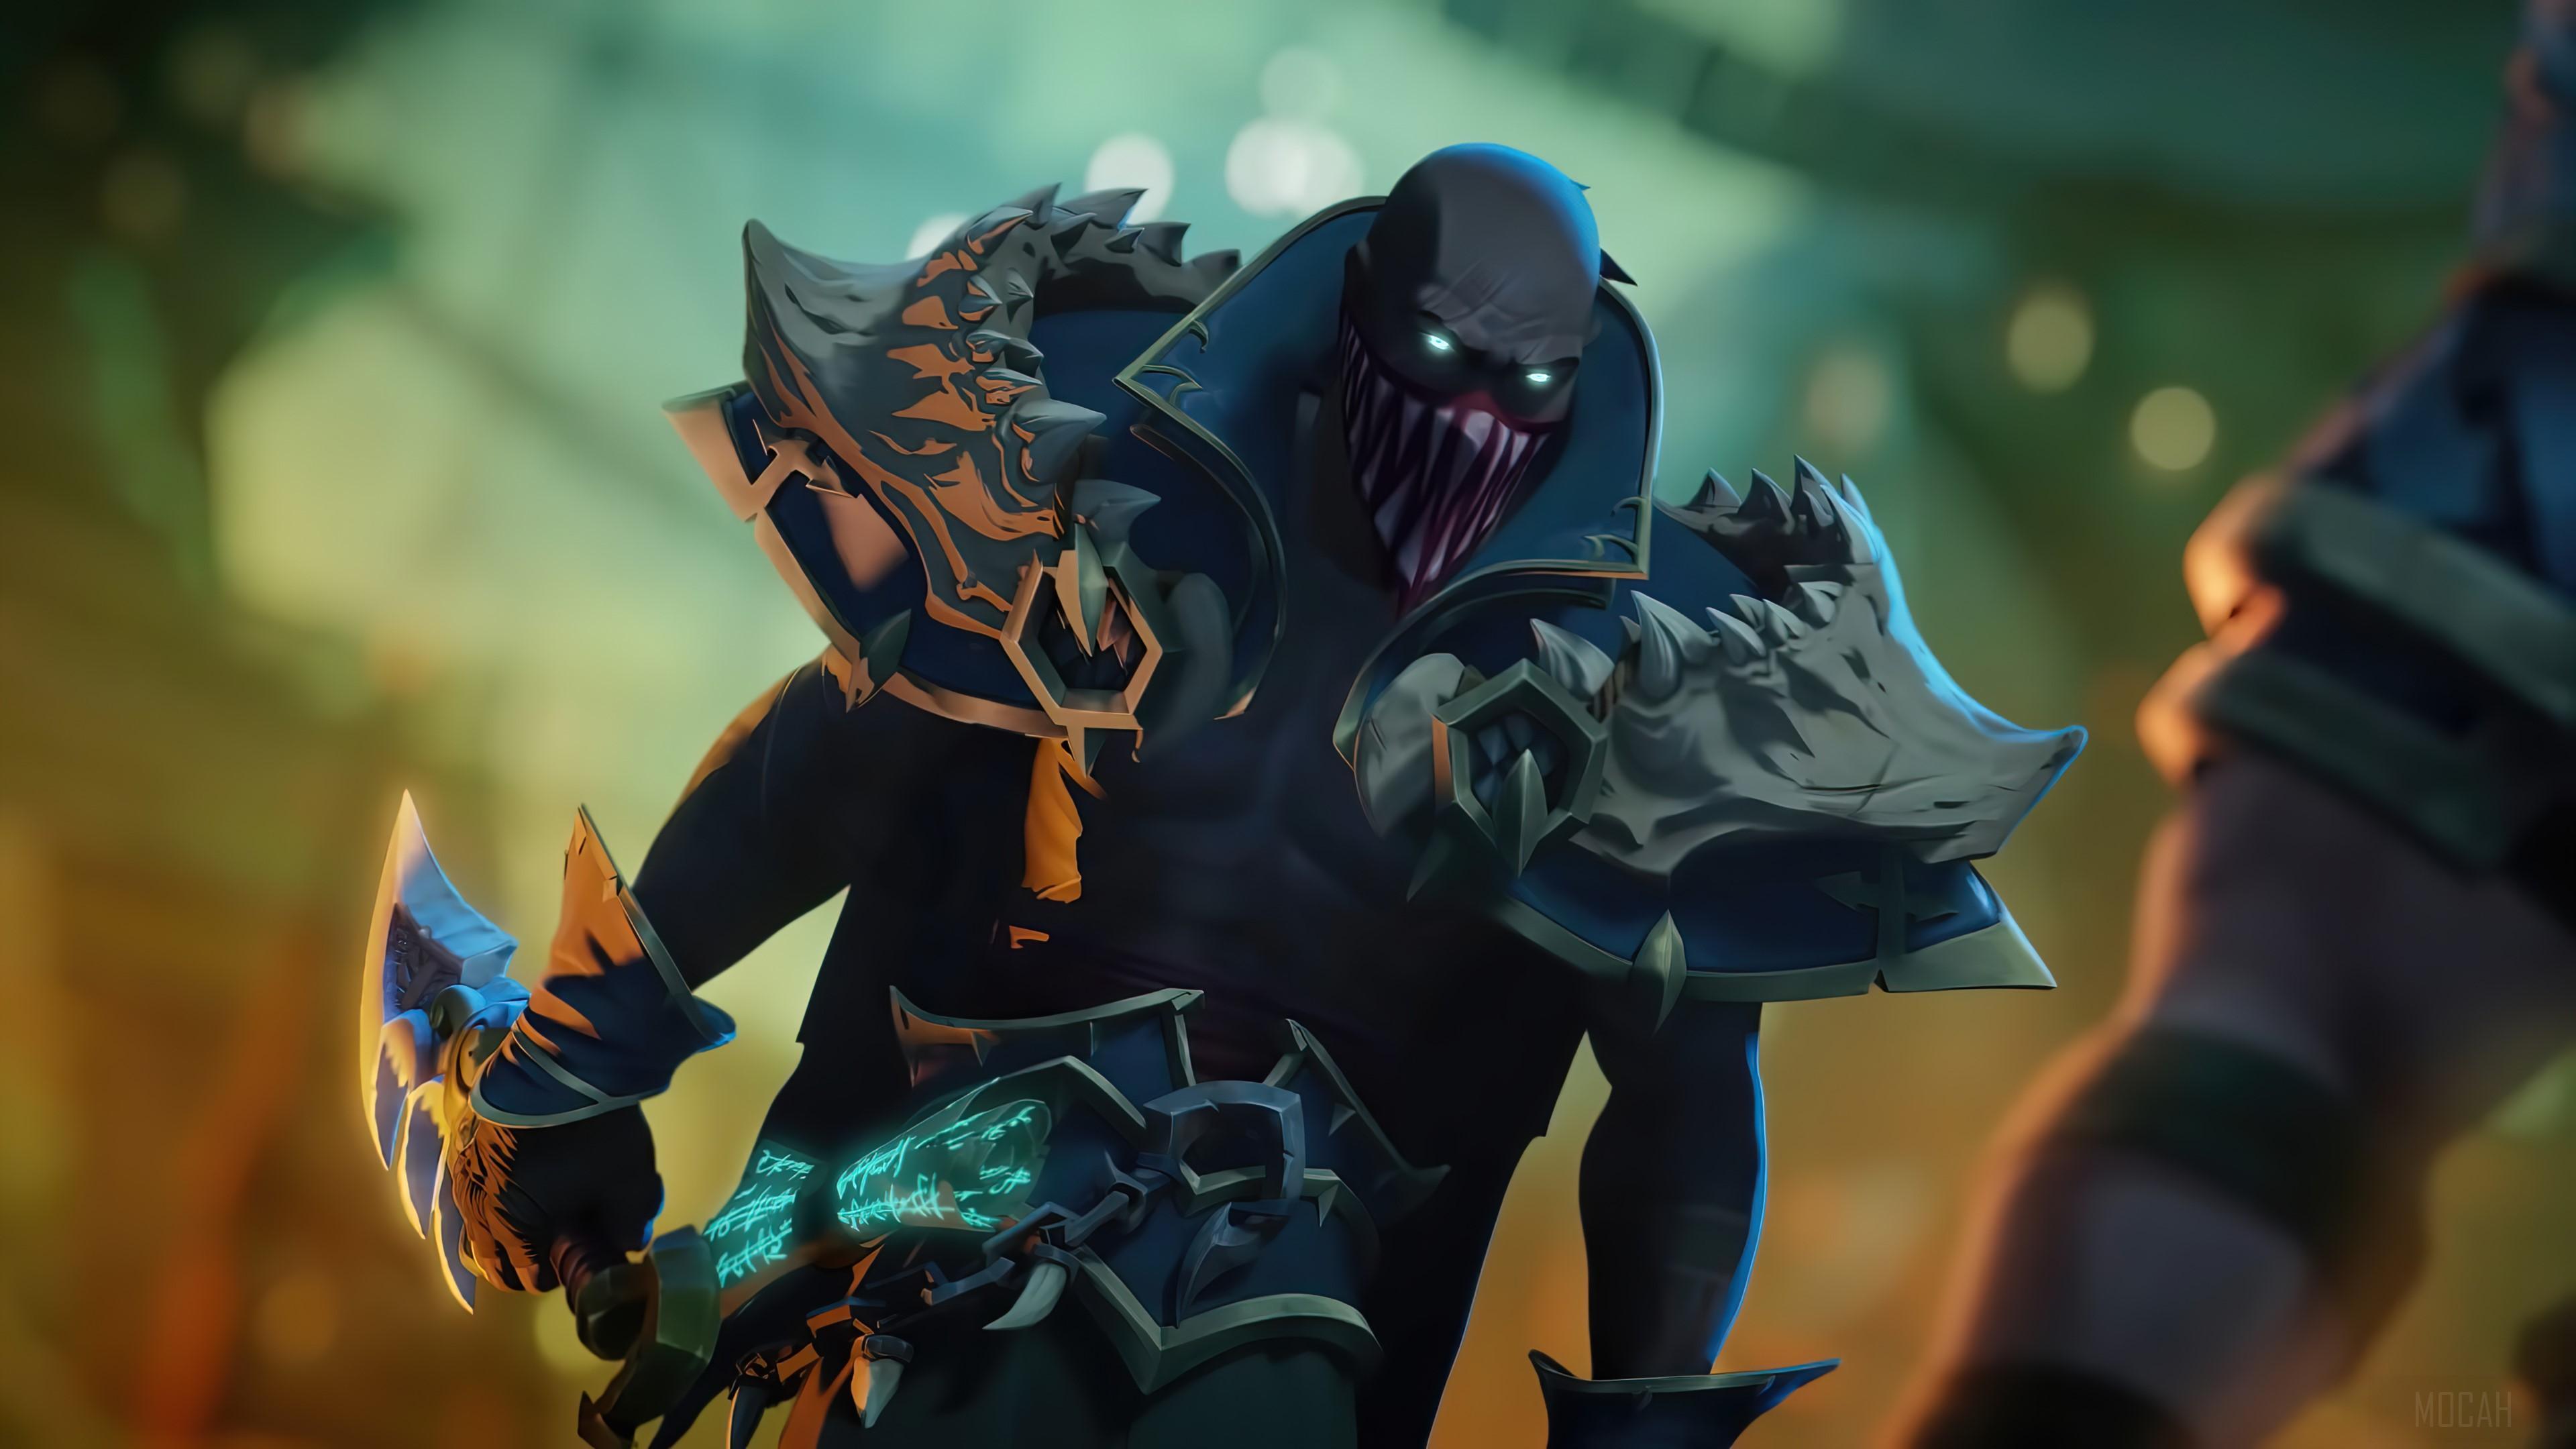 HD wallpaper, League Of Legends 4K, Ruined King A League Of Legends Story, Video Game, Pyke, Lol